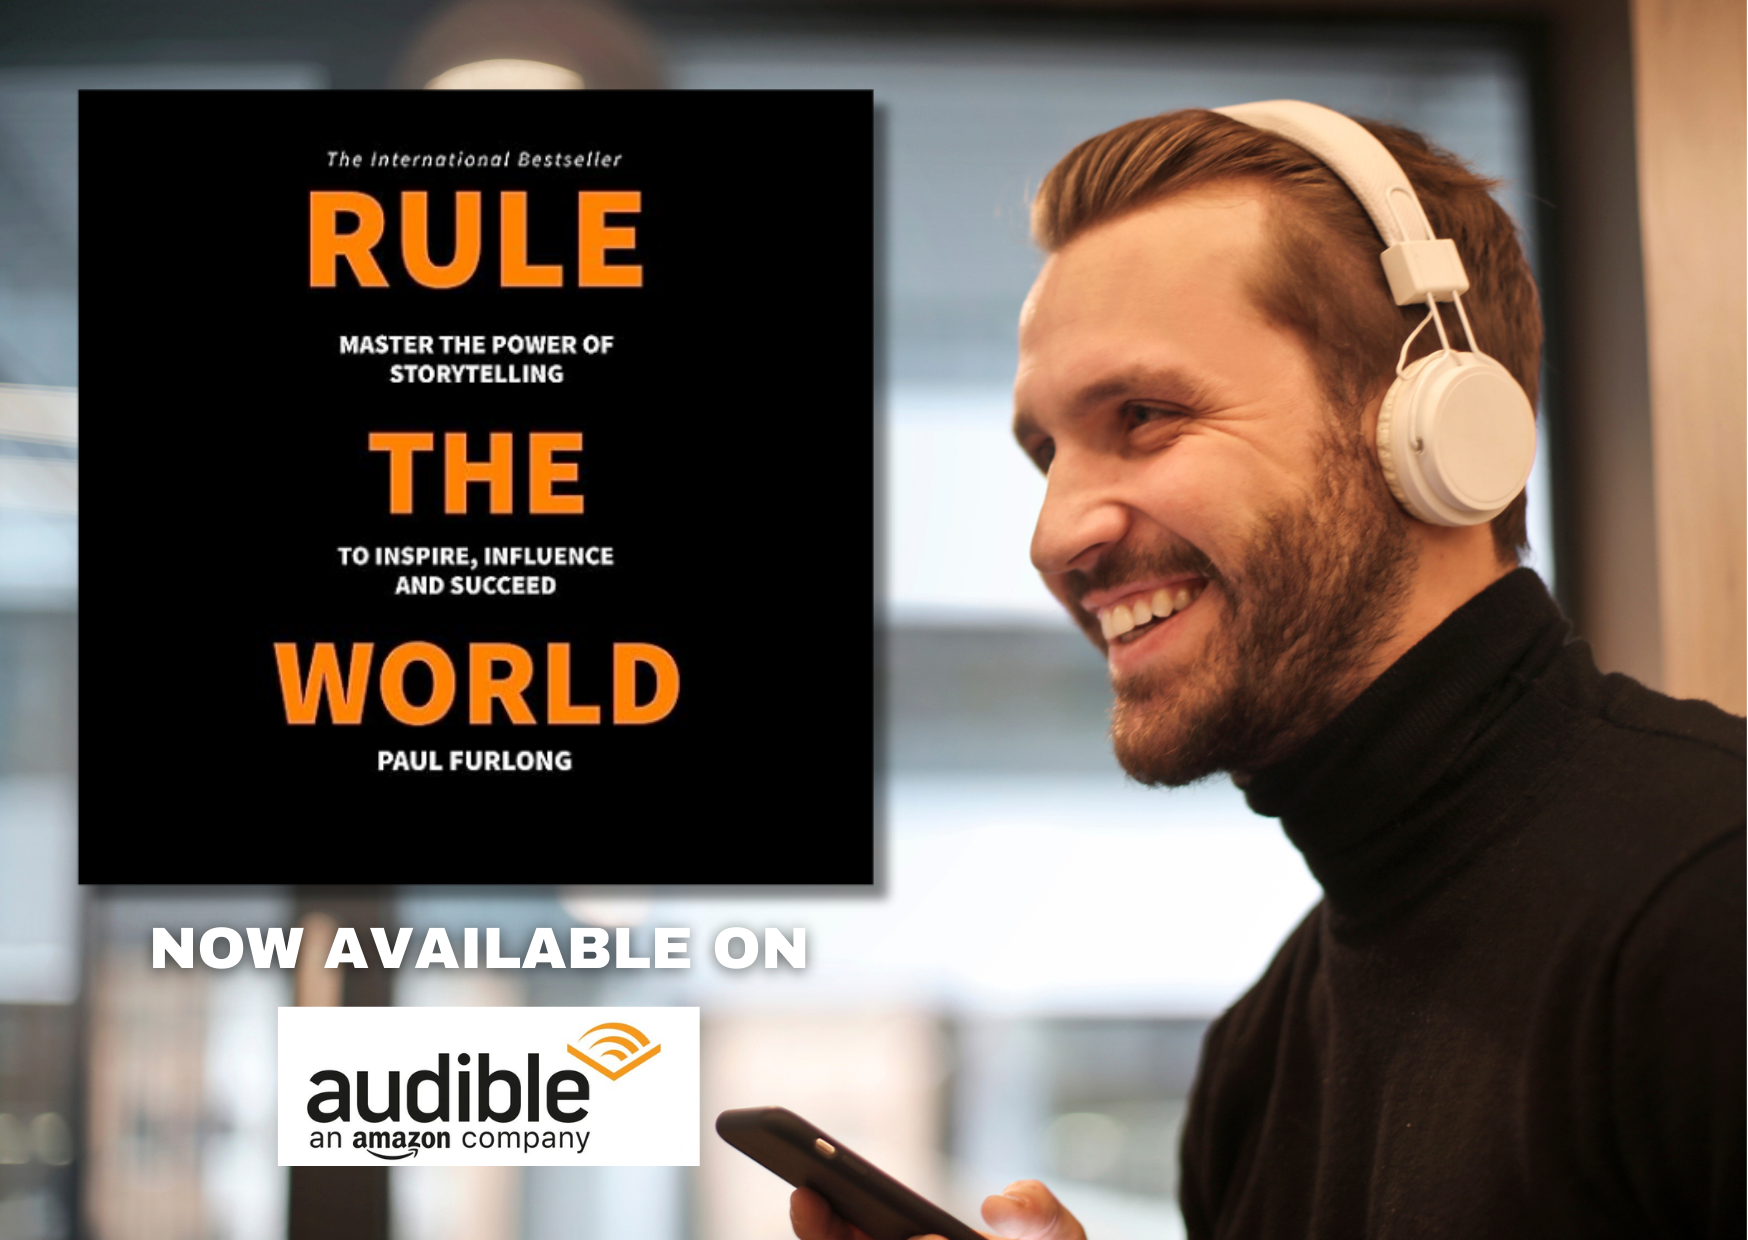 Listen up! Learn How To Rule The World